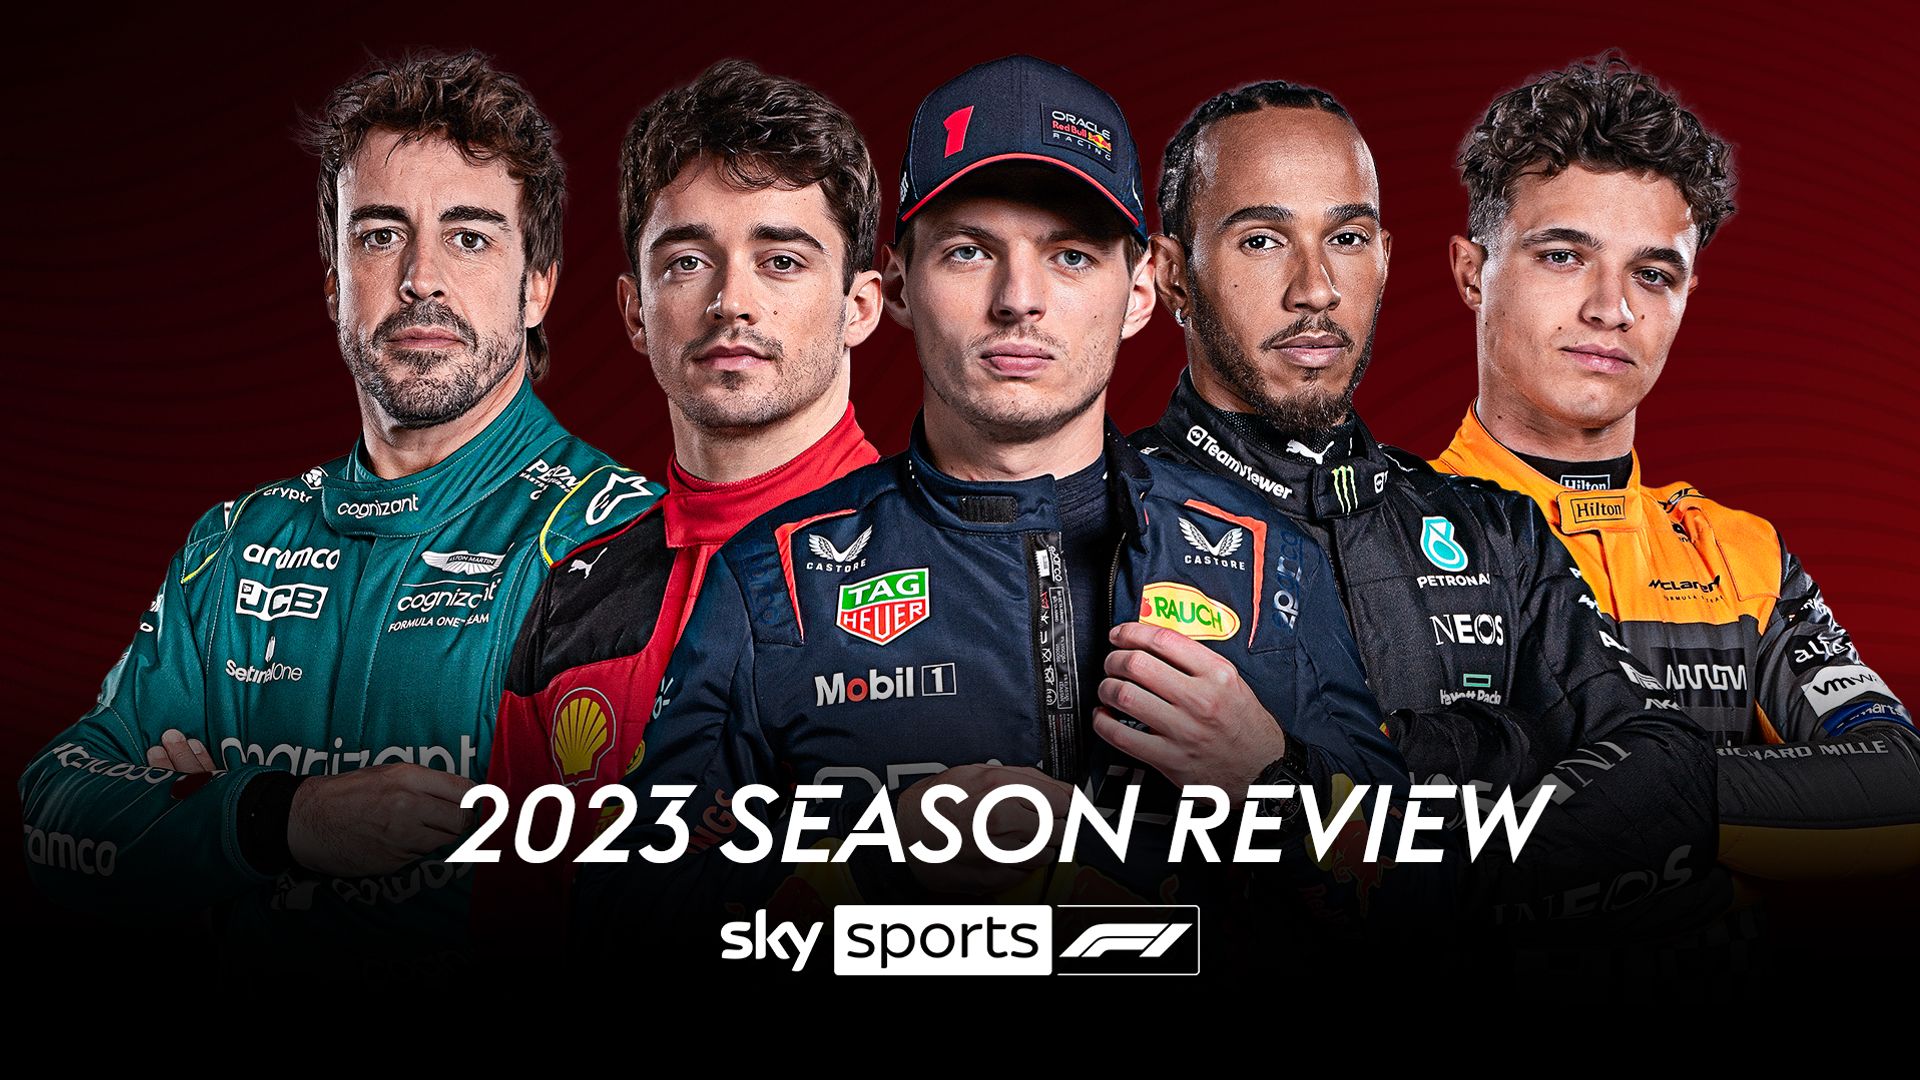 FREE LIVE STREAM: Watch the Sky Sports F1 2023 review show!